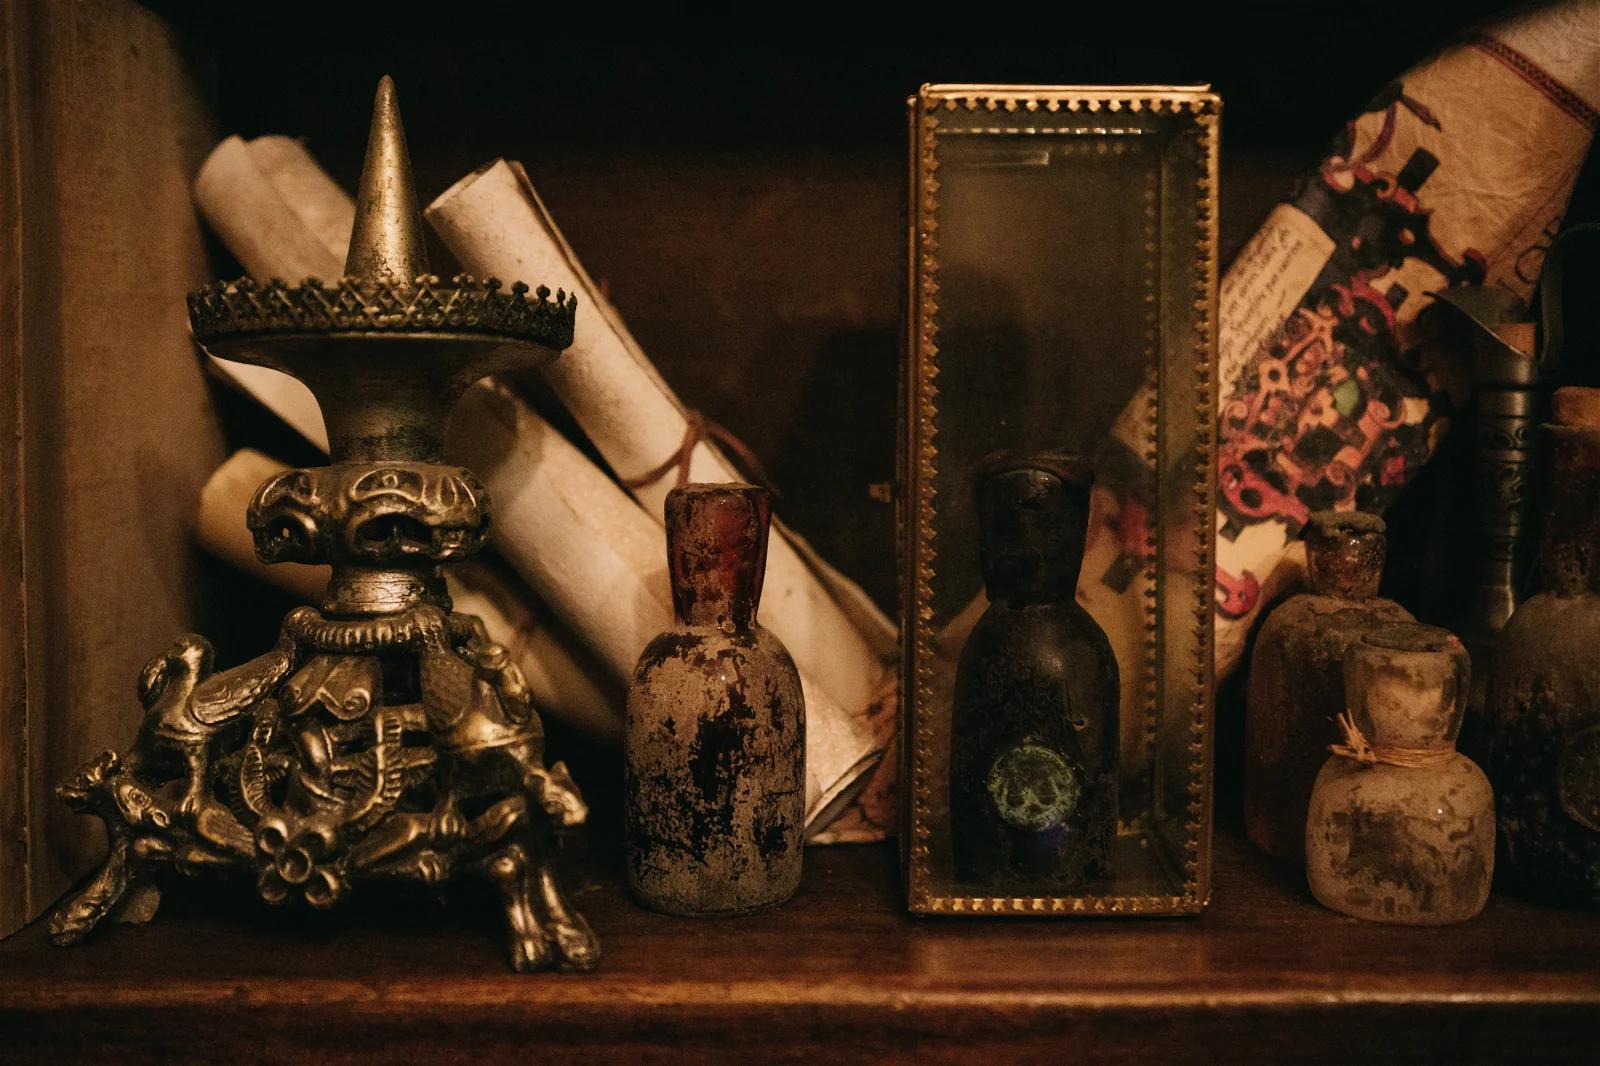 A dimly lit shelf displaying an assortment of ancient-looking artifacts, including scrolls, bottles, and a small statue.
